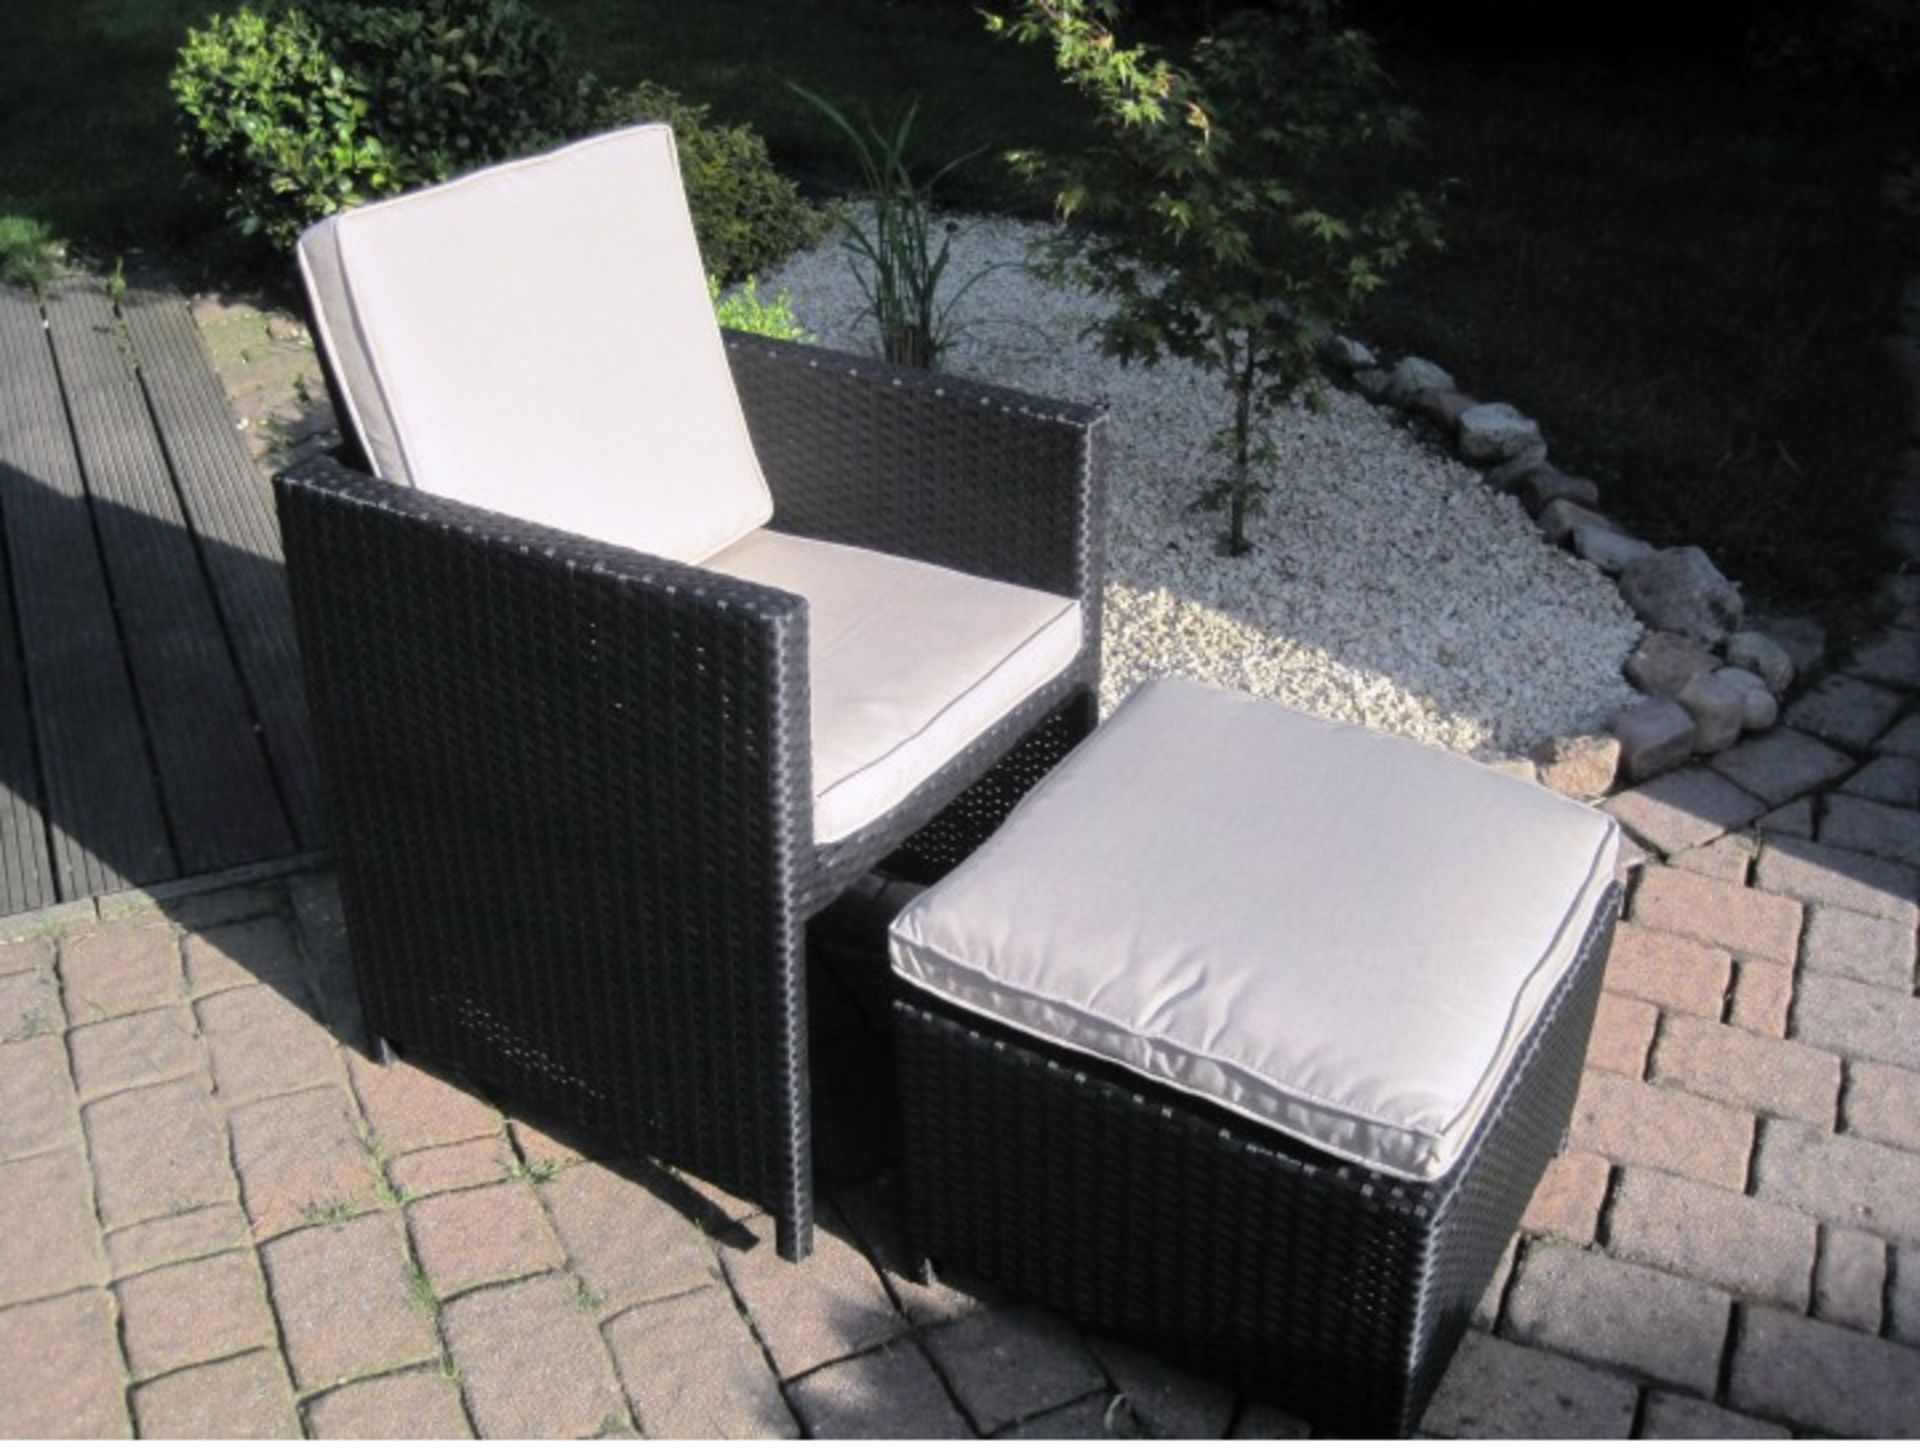 NEW Toscana balcony furniture set in Black - Image 6 of 10